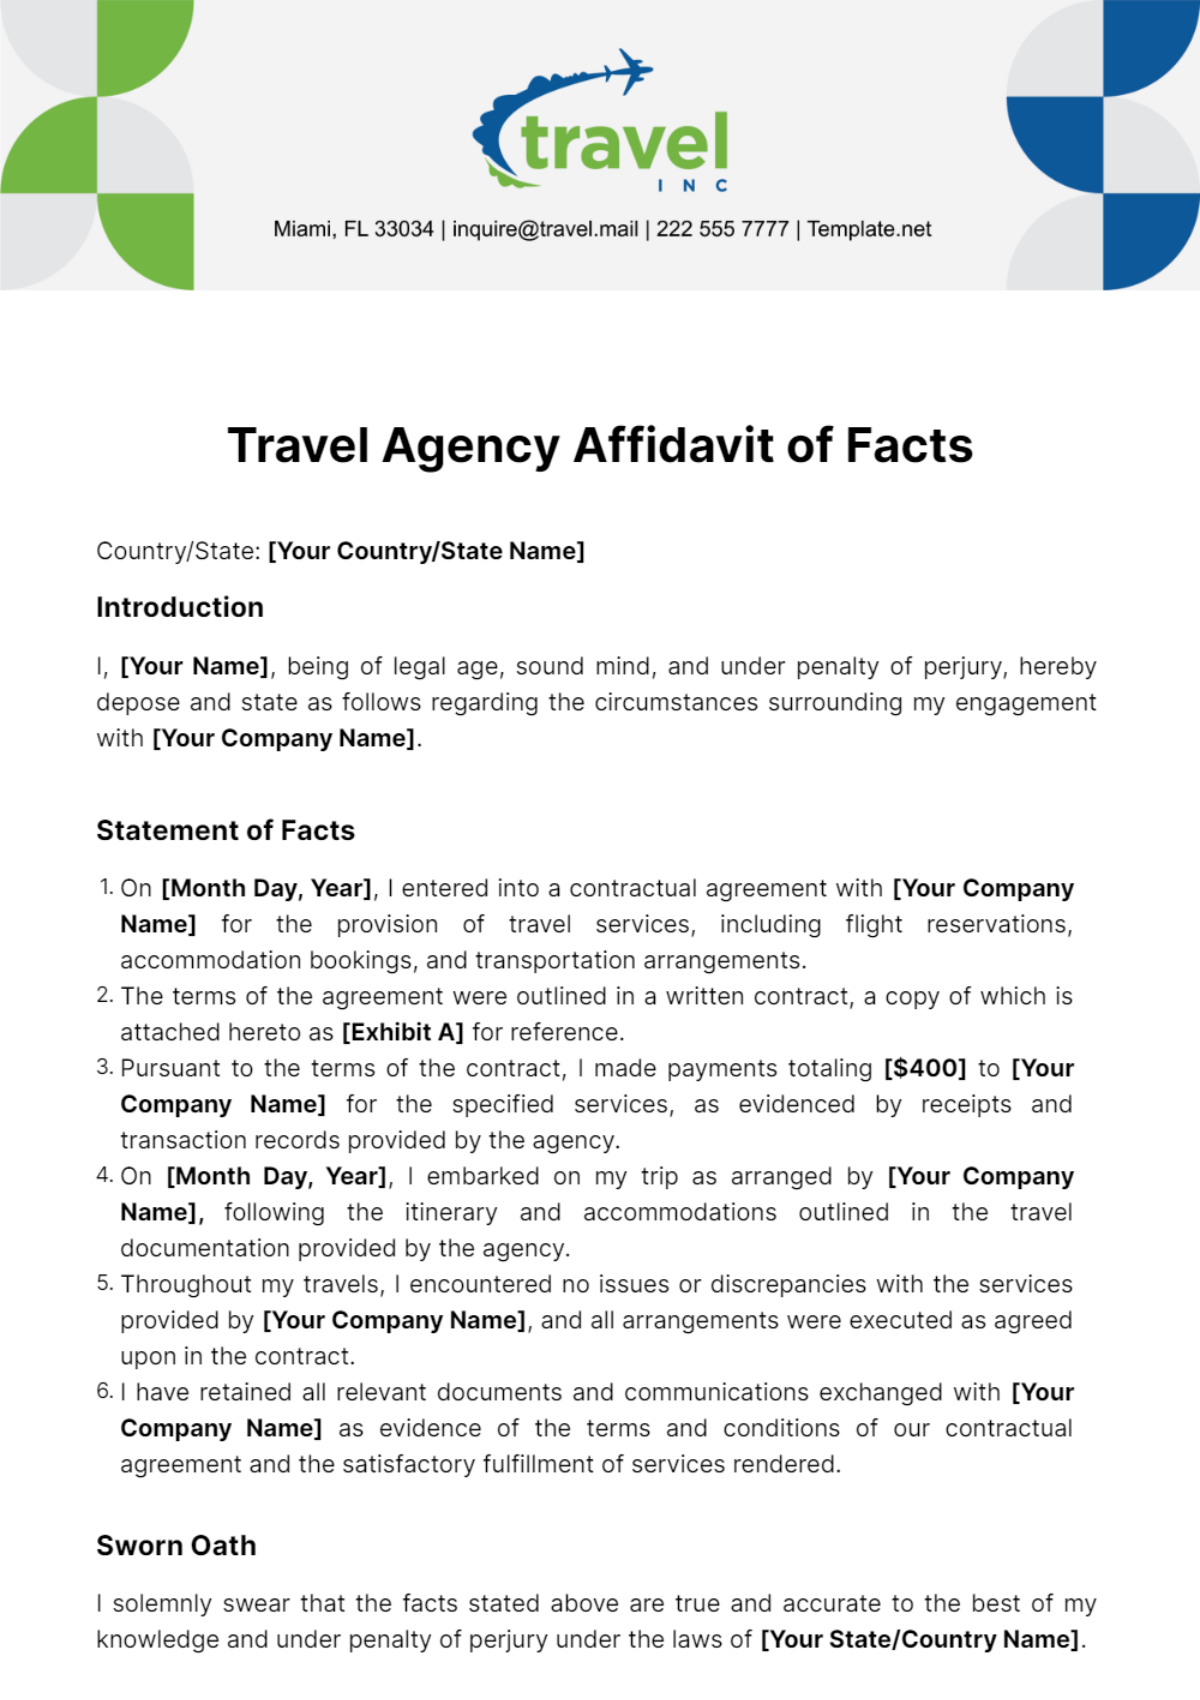 Travel Agency Affidavit of Facts Template